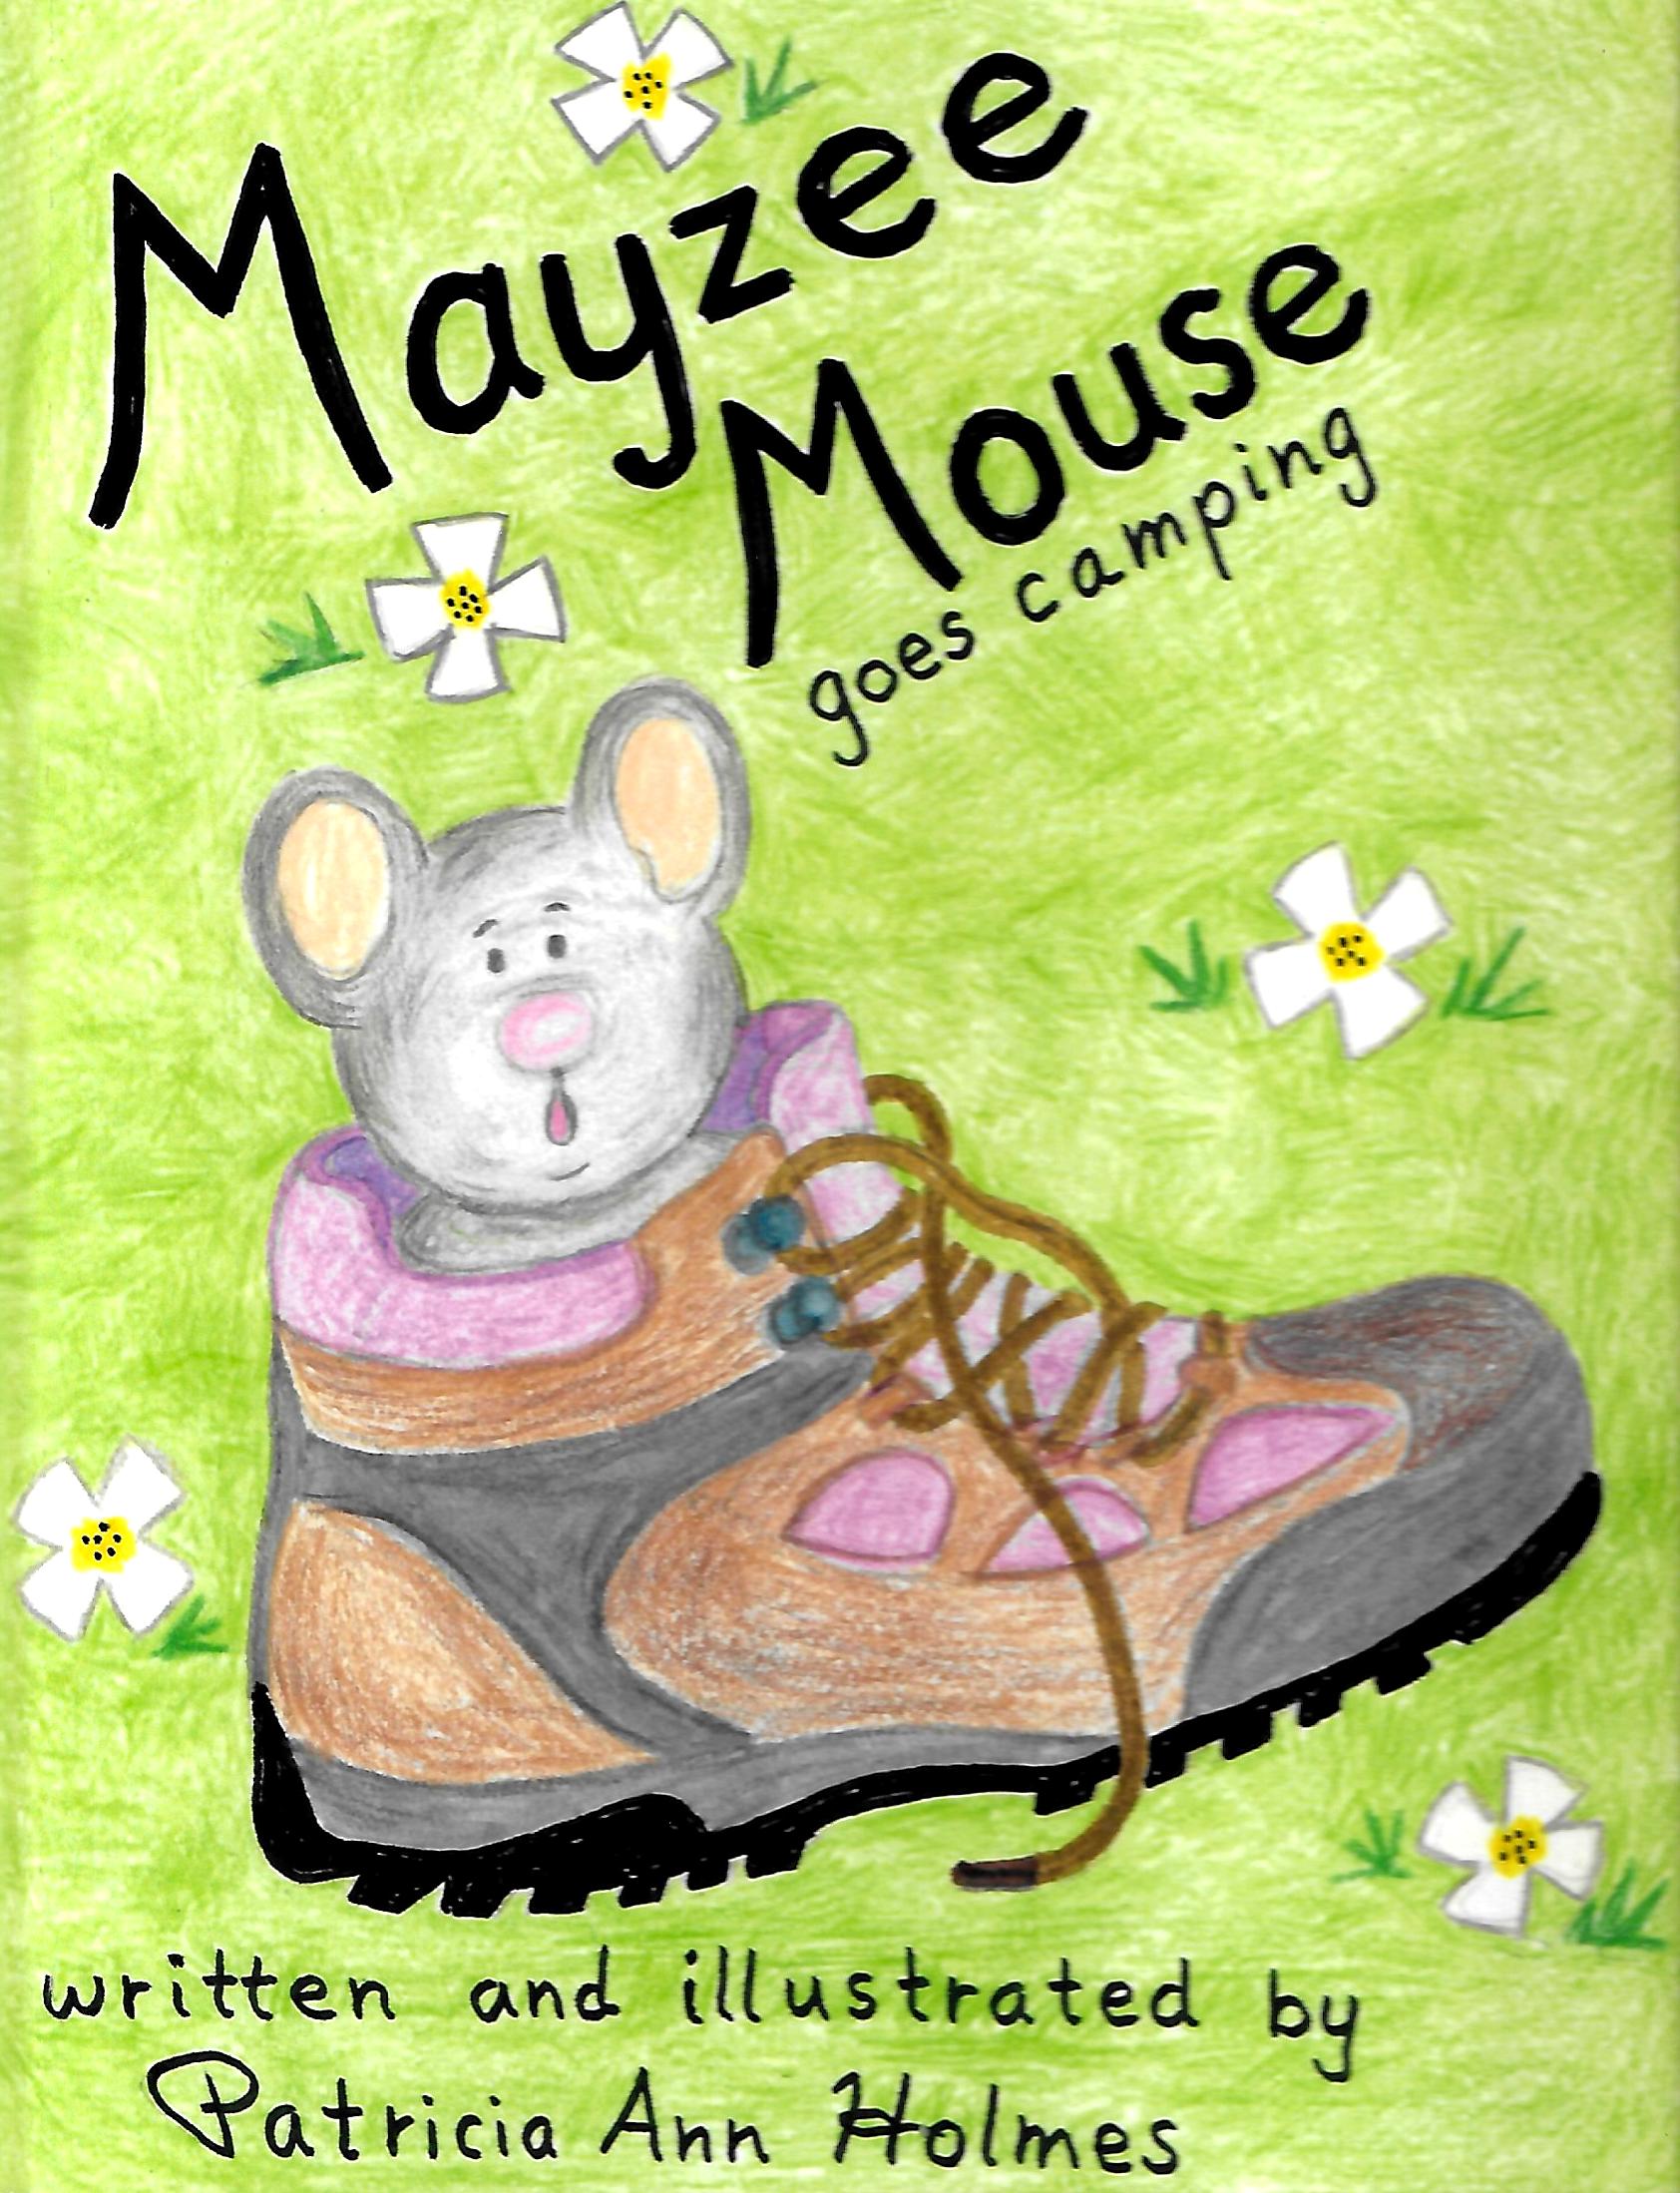 Mayzee Mouse Goes Camping